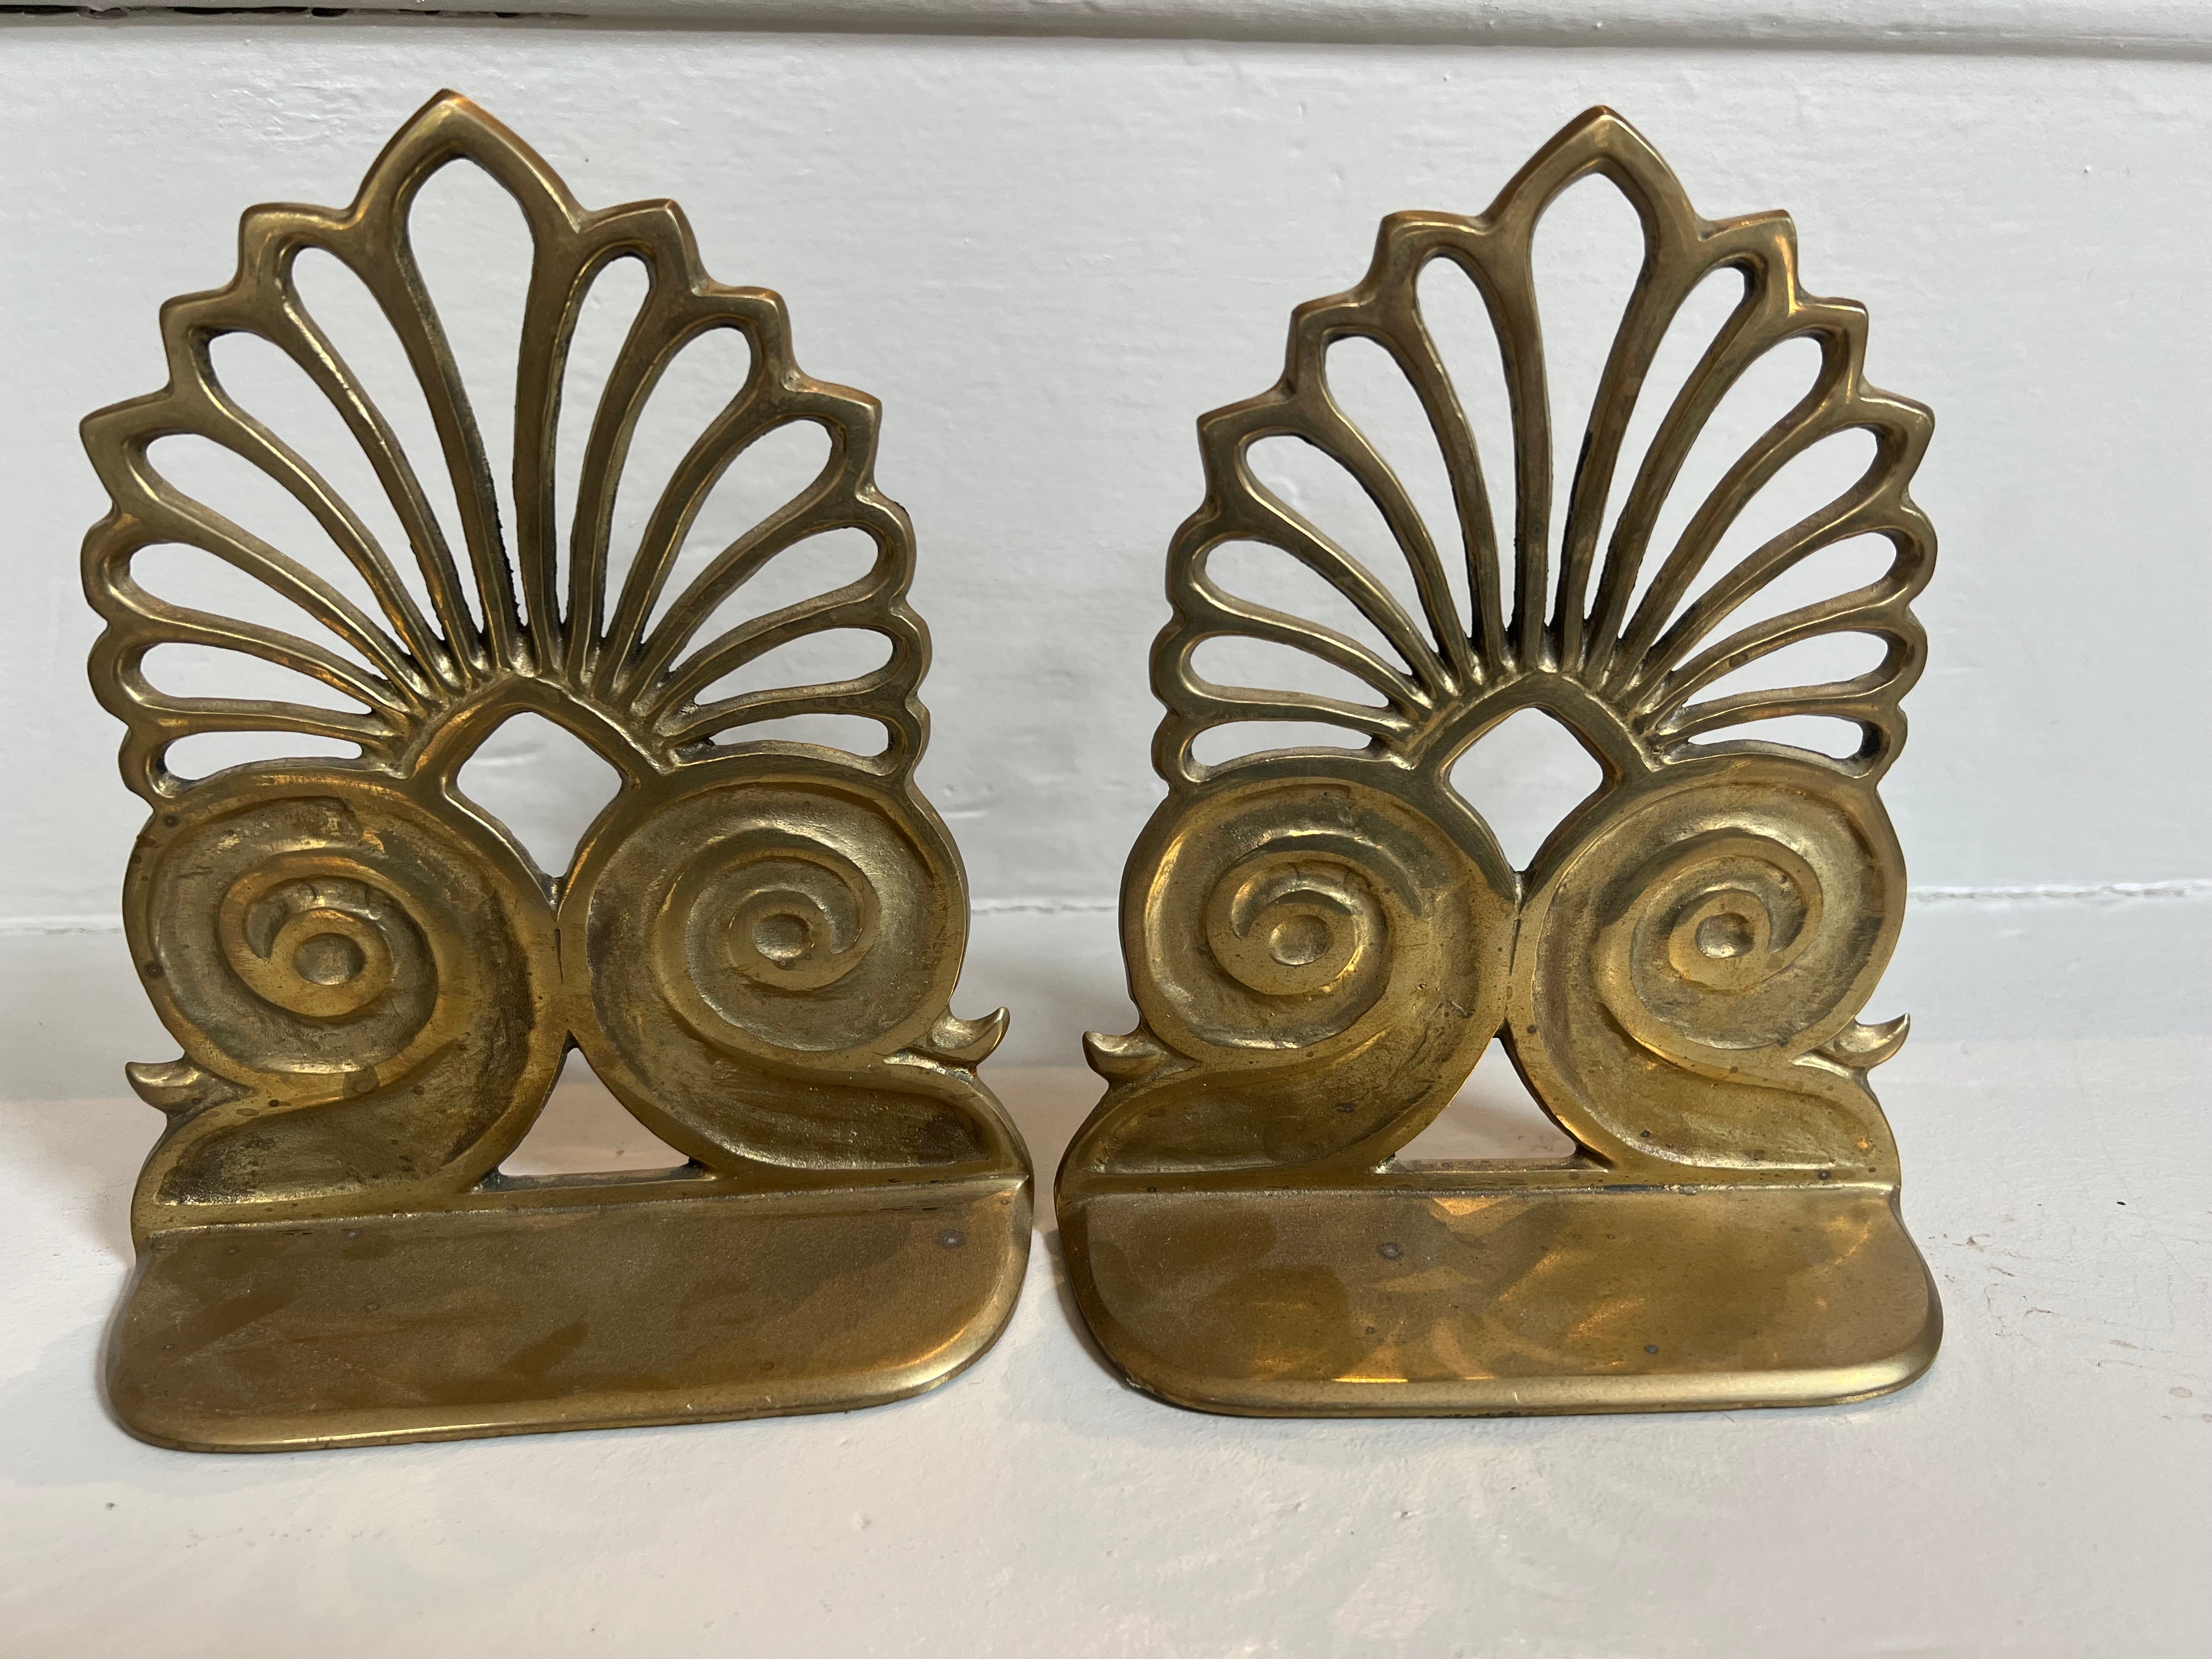 Pair of Vintage Brass Bookends